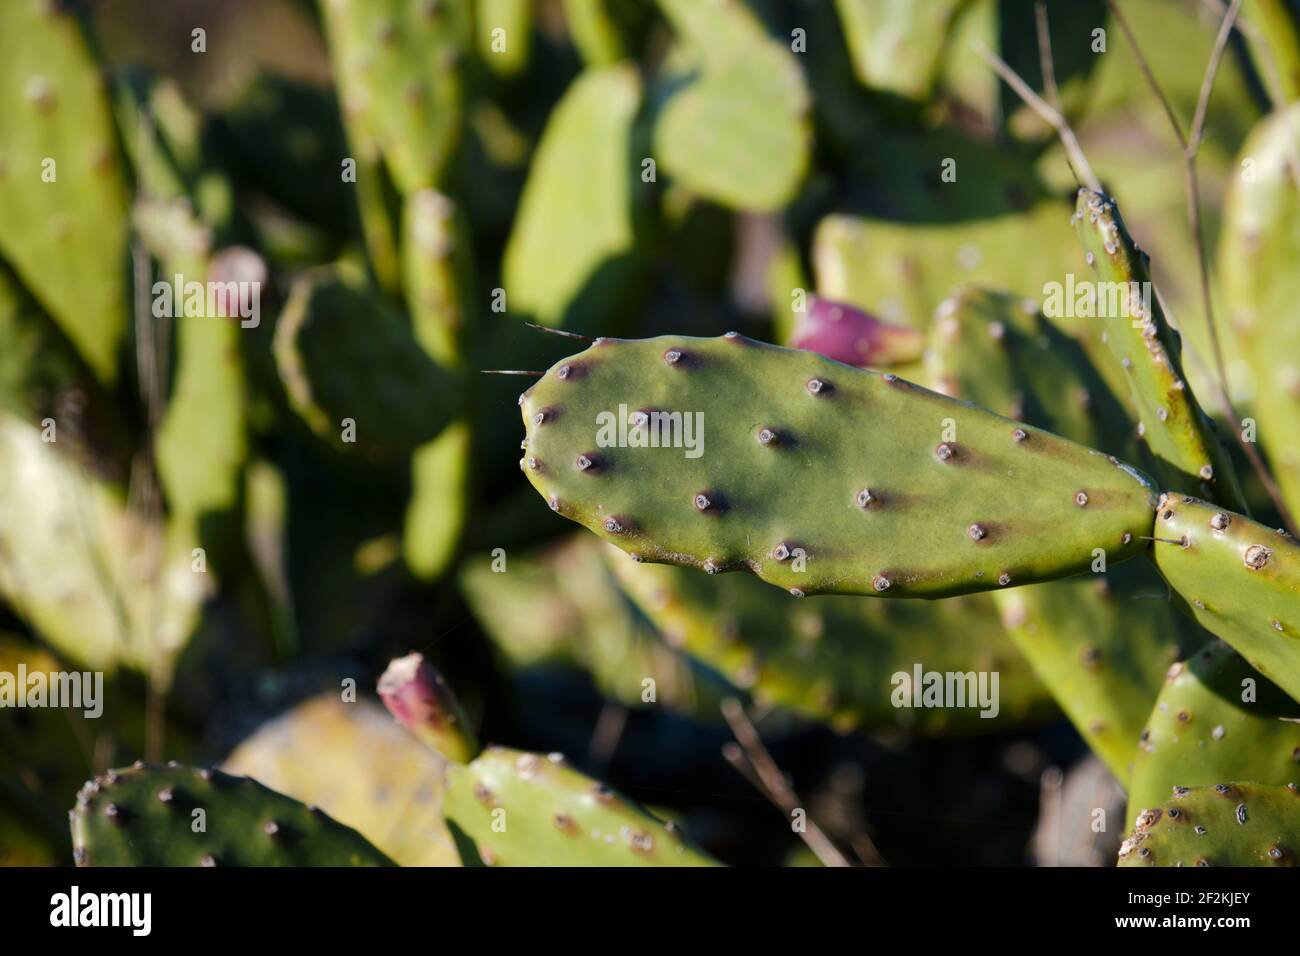 Detail of opuntia ficus indica or prickly pear cactus Stock Photo